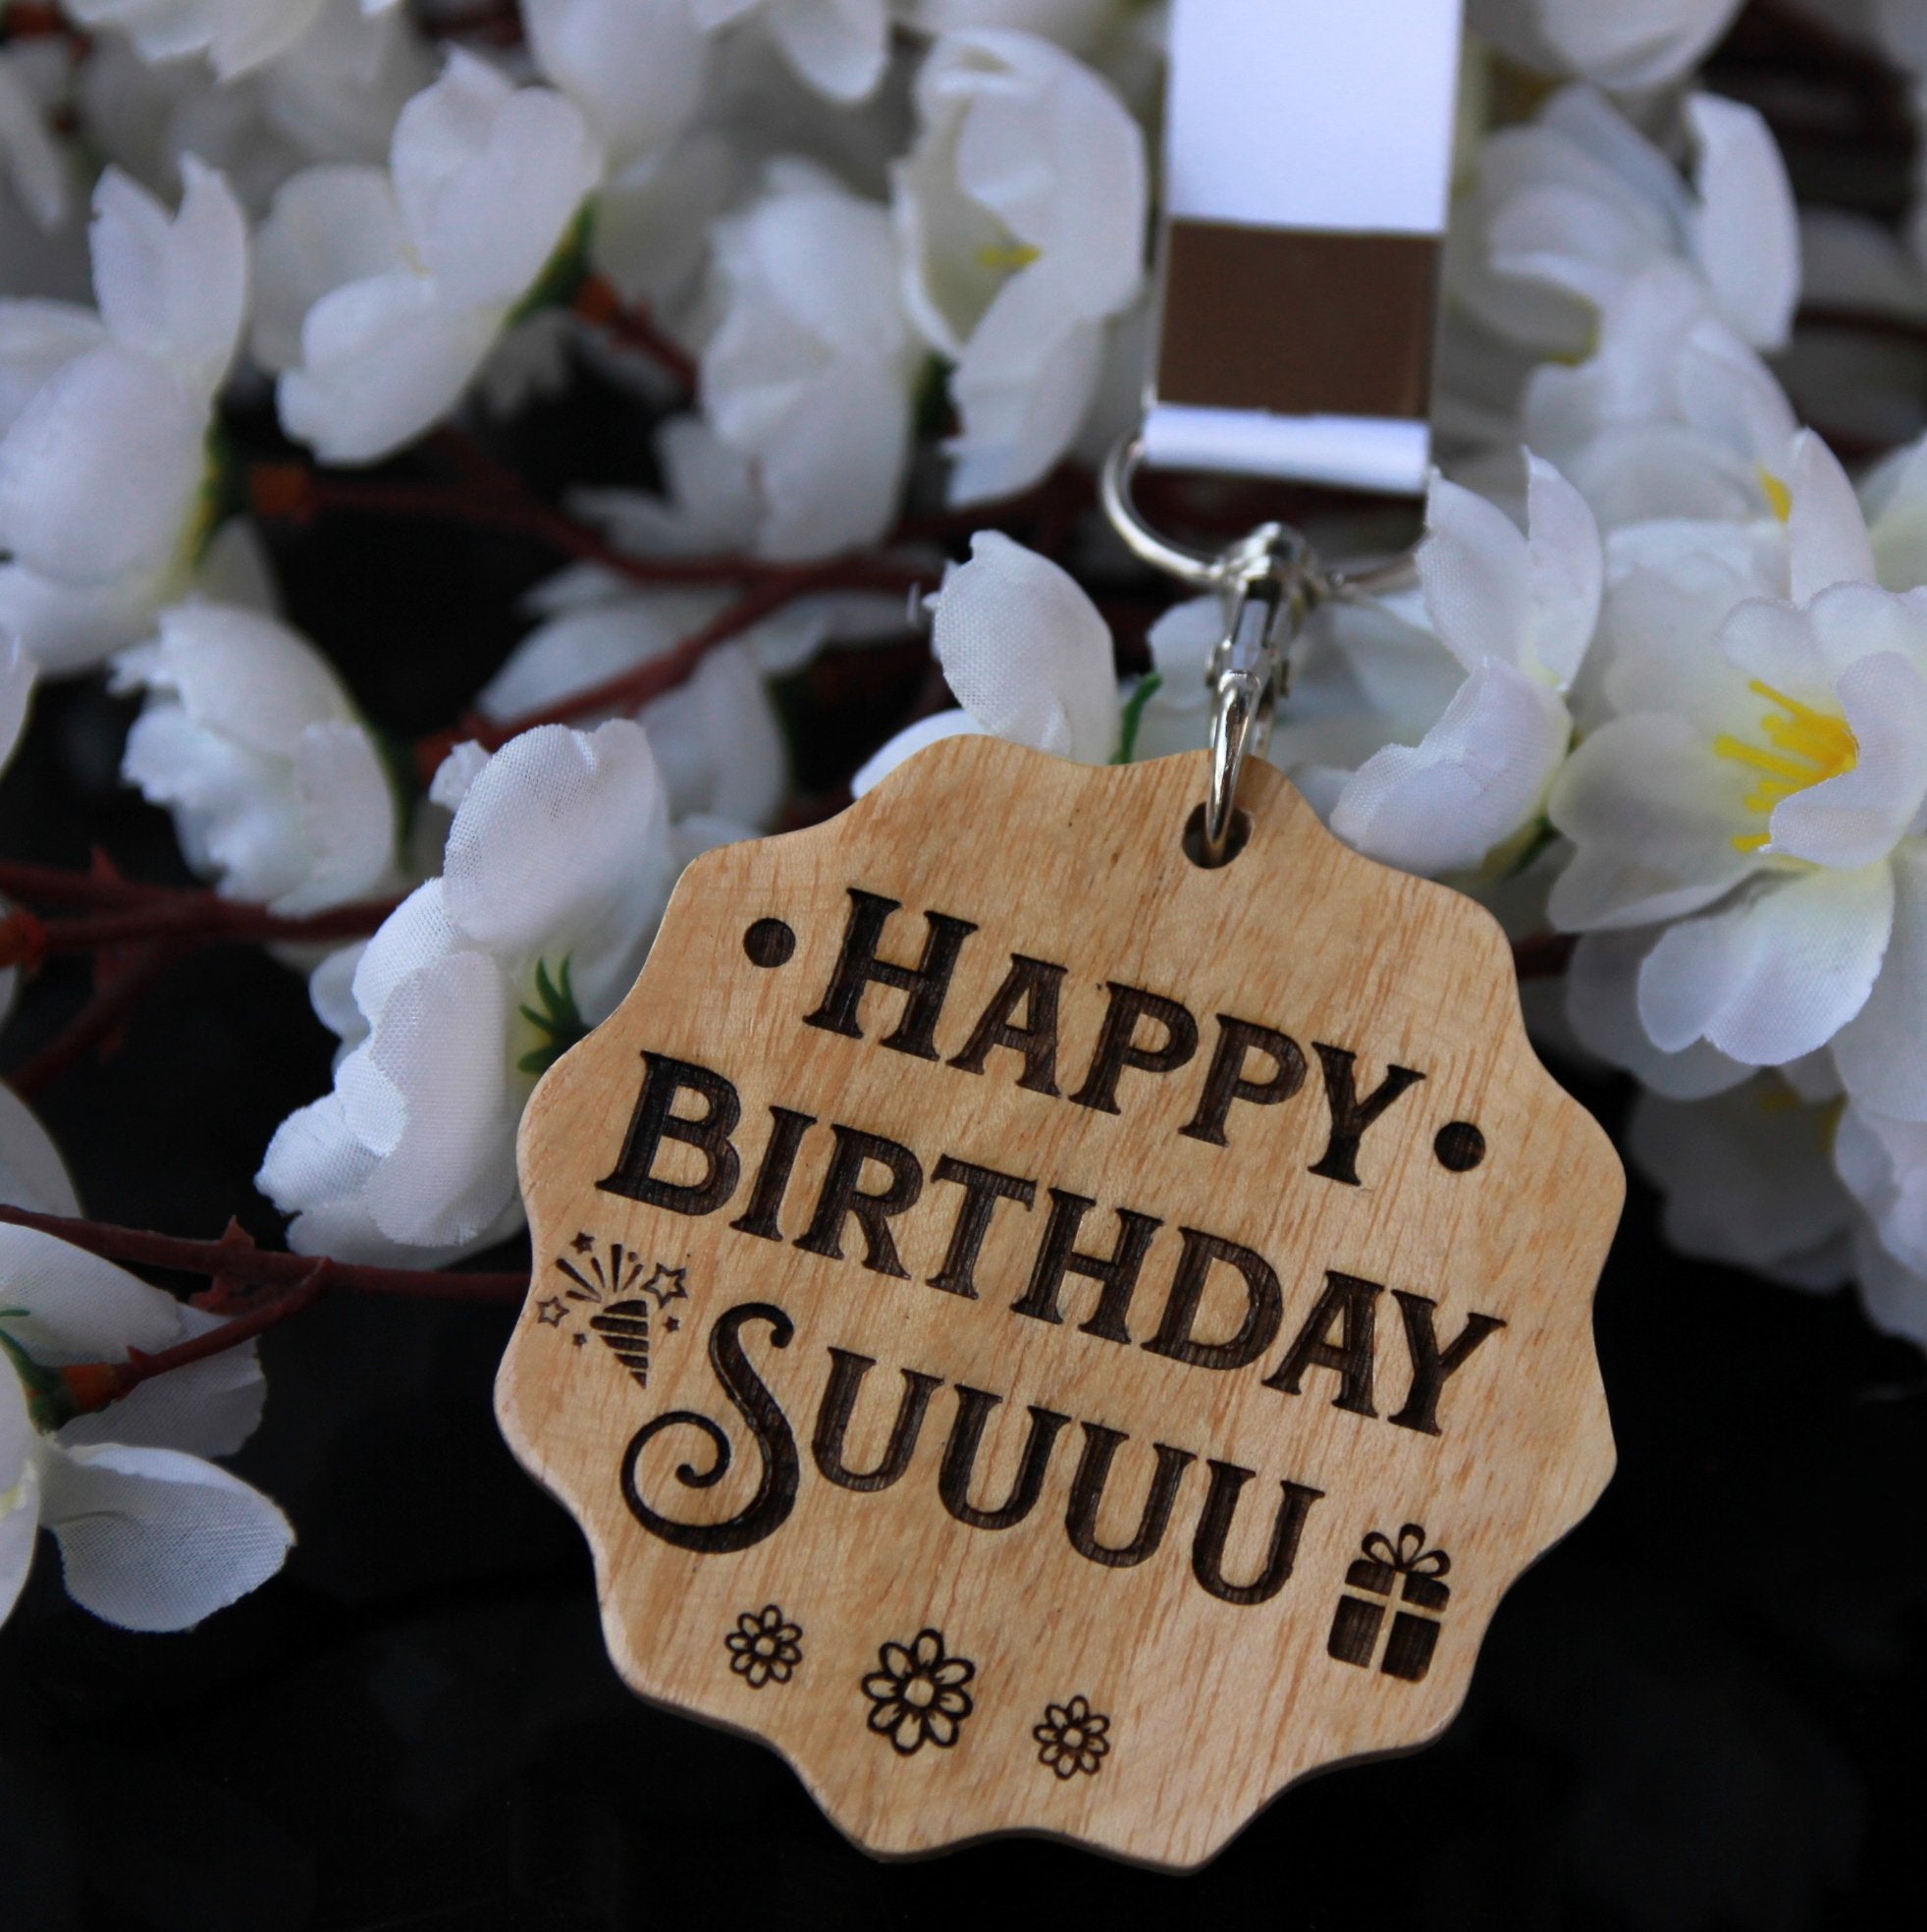 This Custom Medal Engraved With A Birthday Message Is The Best Birthday Gift For Sister. Looking for gifts for sister? This Birthday Greetings Engraved On This Wooden Medal Is A Great Personalized Gift.